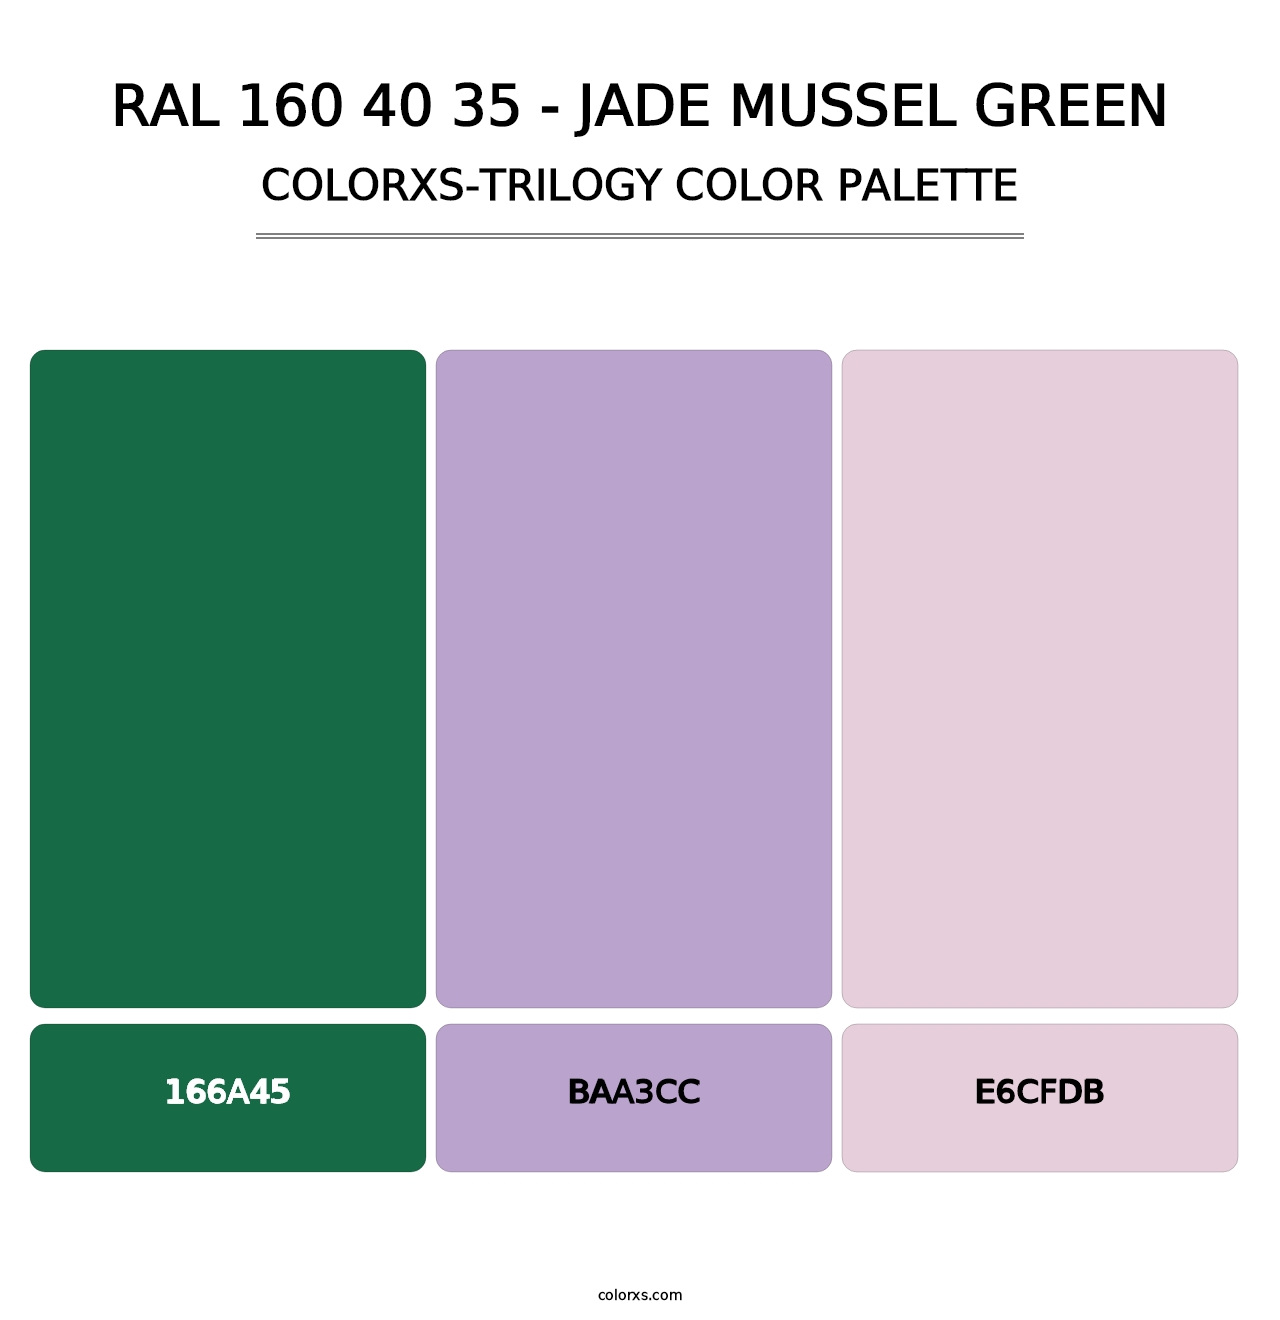 RAL 160 40 35 - Jade Mussel Green - Colorxs Trilogy Palette